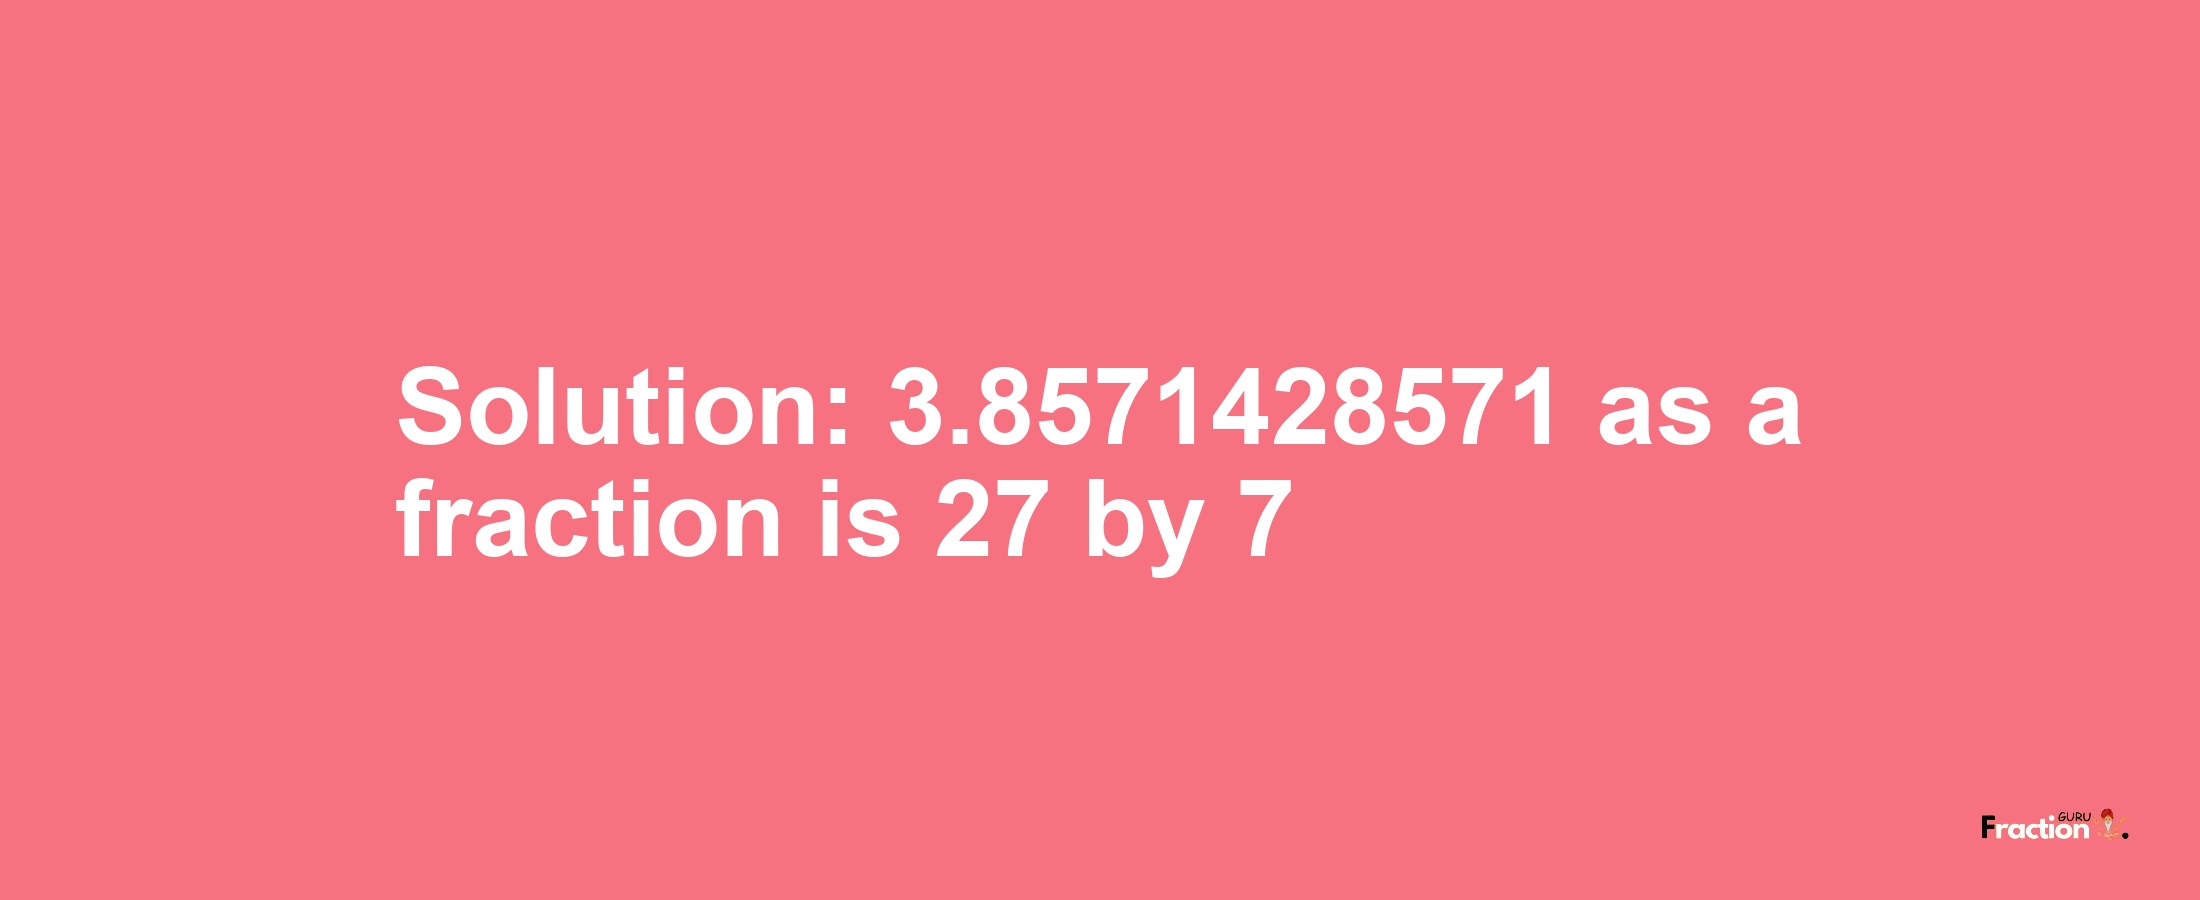 Solution:3.8571428571 as a fraction is 27/7